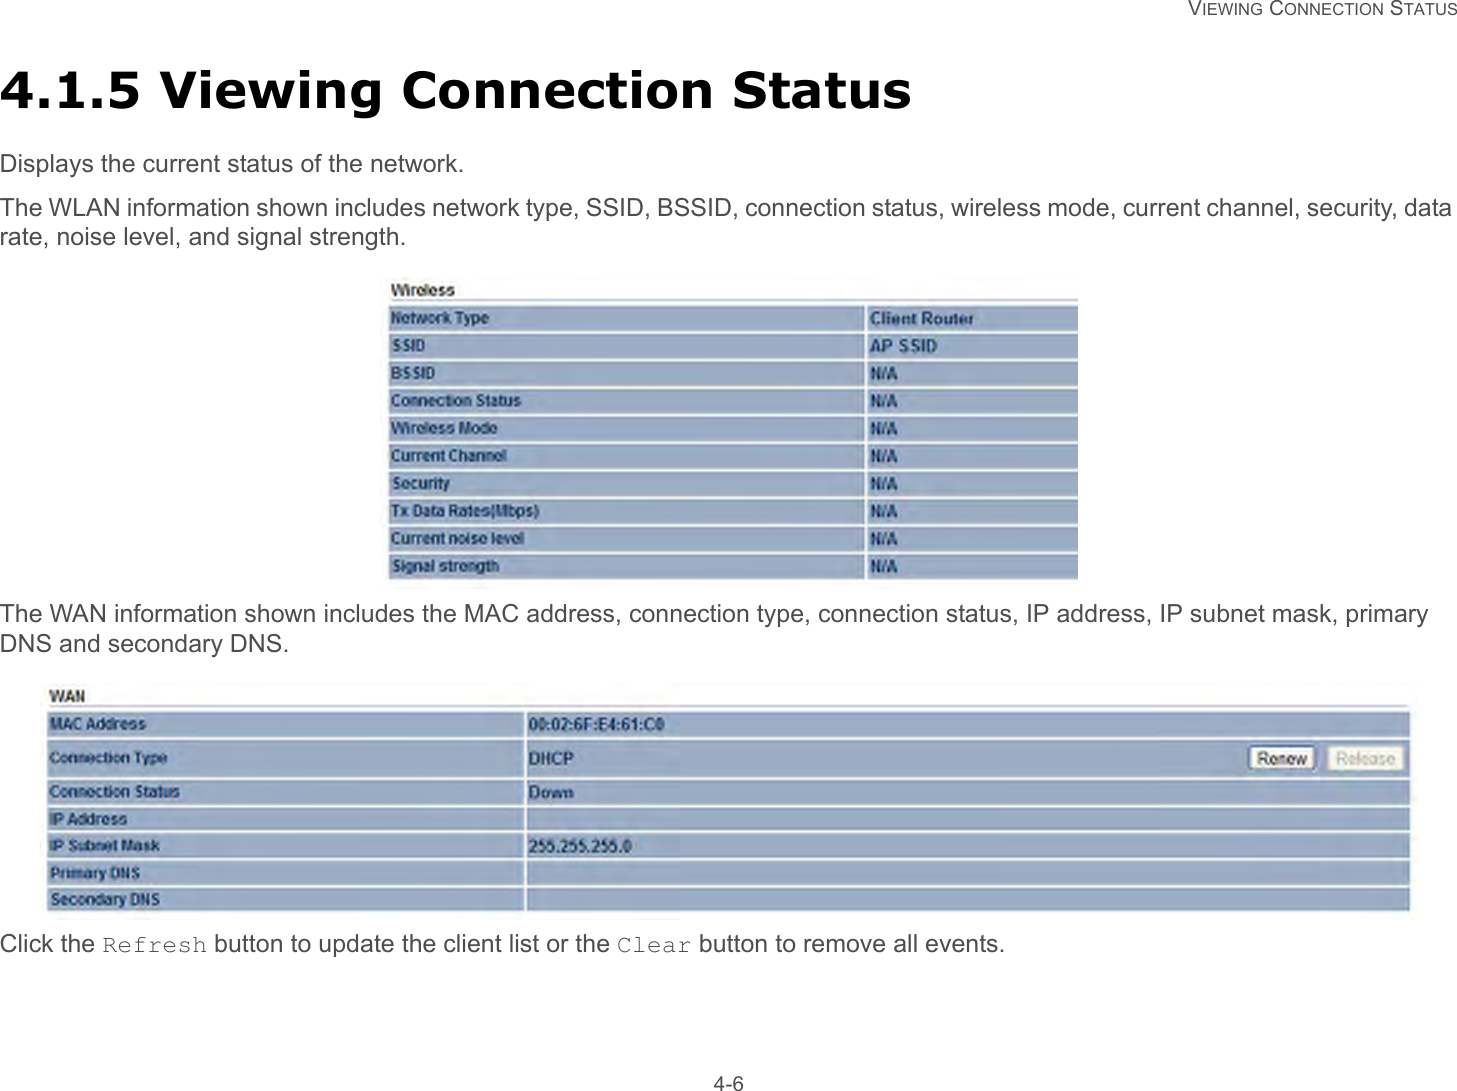   VIEWING CONNECTION STATUS 4-64.1.5 Viewing Connection StatusDisplays the current status of the network.The WLAN information shown includes network type, SSID, BSSID, connection status, wireless mode, current channel, security, data rate, noise level, and signal strength.The WAN information shown includes the MAC address, connection type, connection status, IP address, IP subnet mask, primary DNS and secondary DNS.Click the Refresh button to update the client list or the Clear button to remove all events.